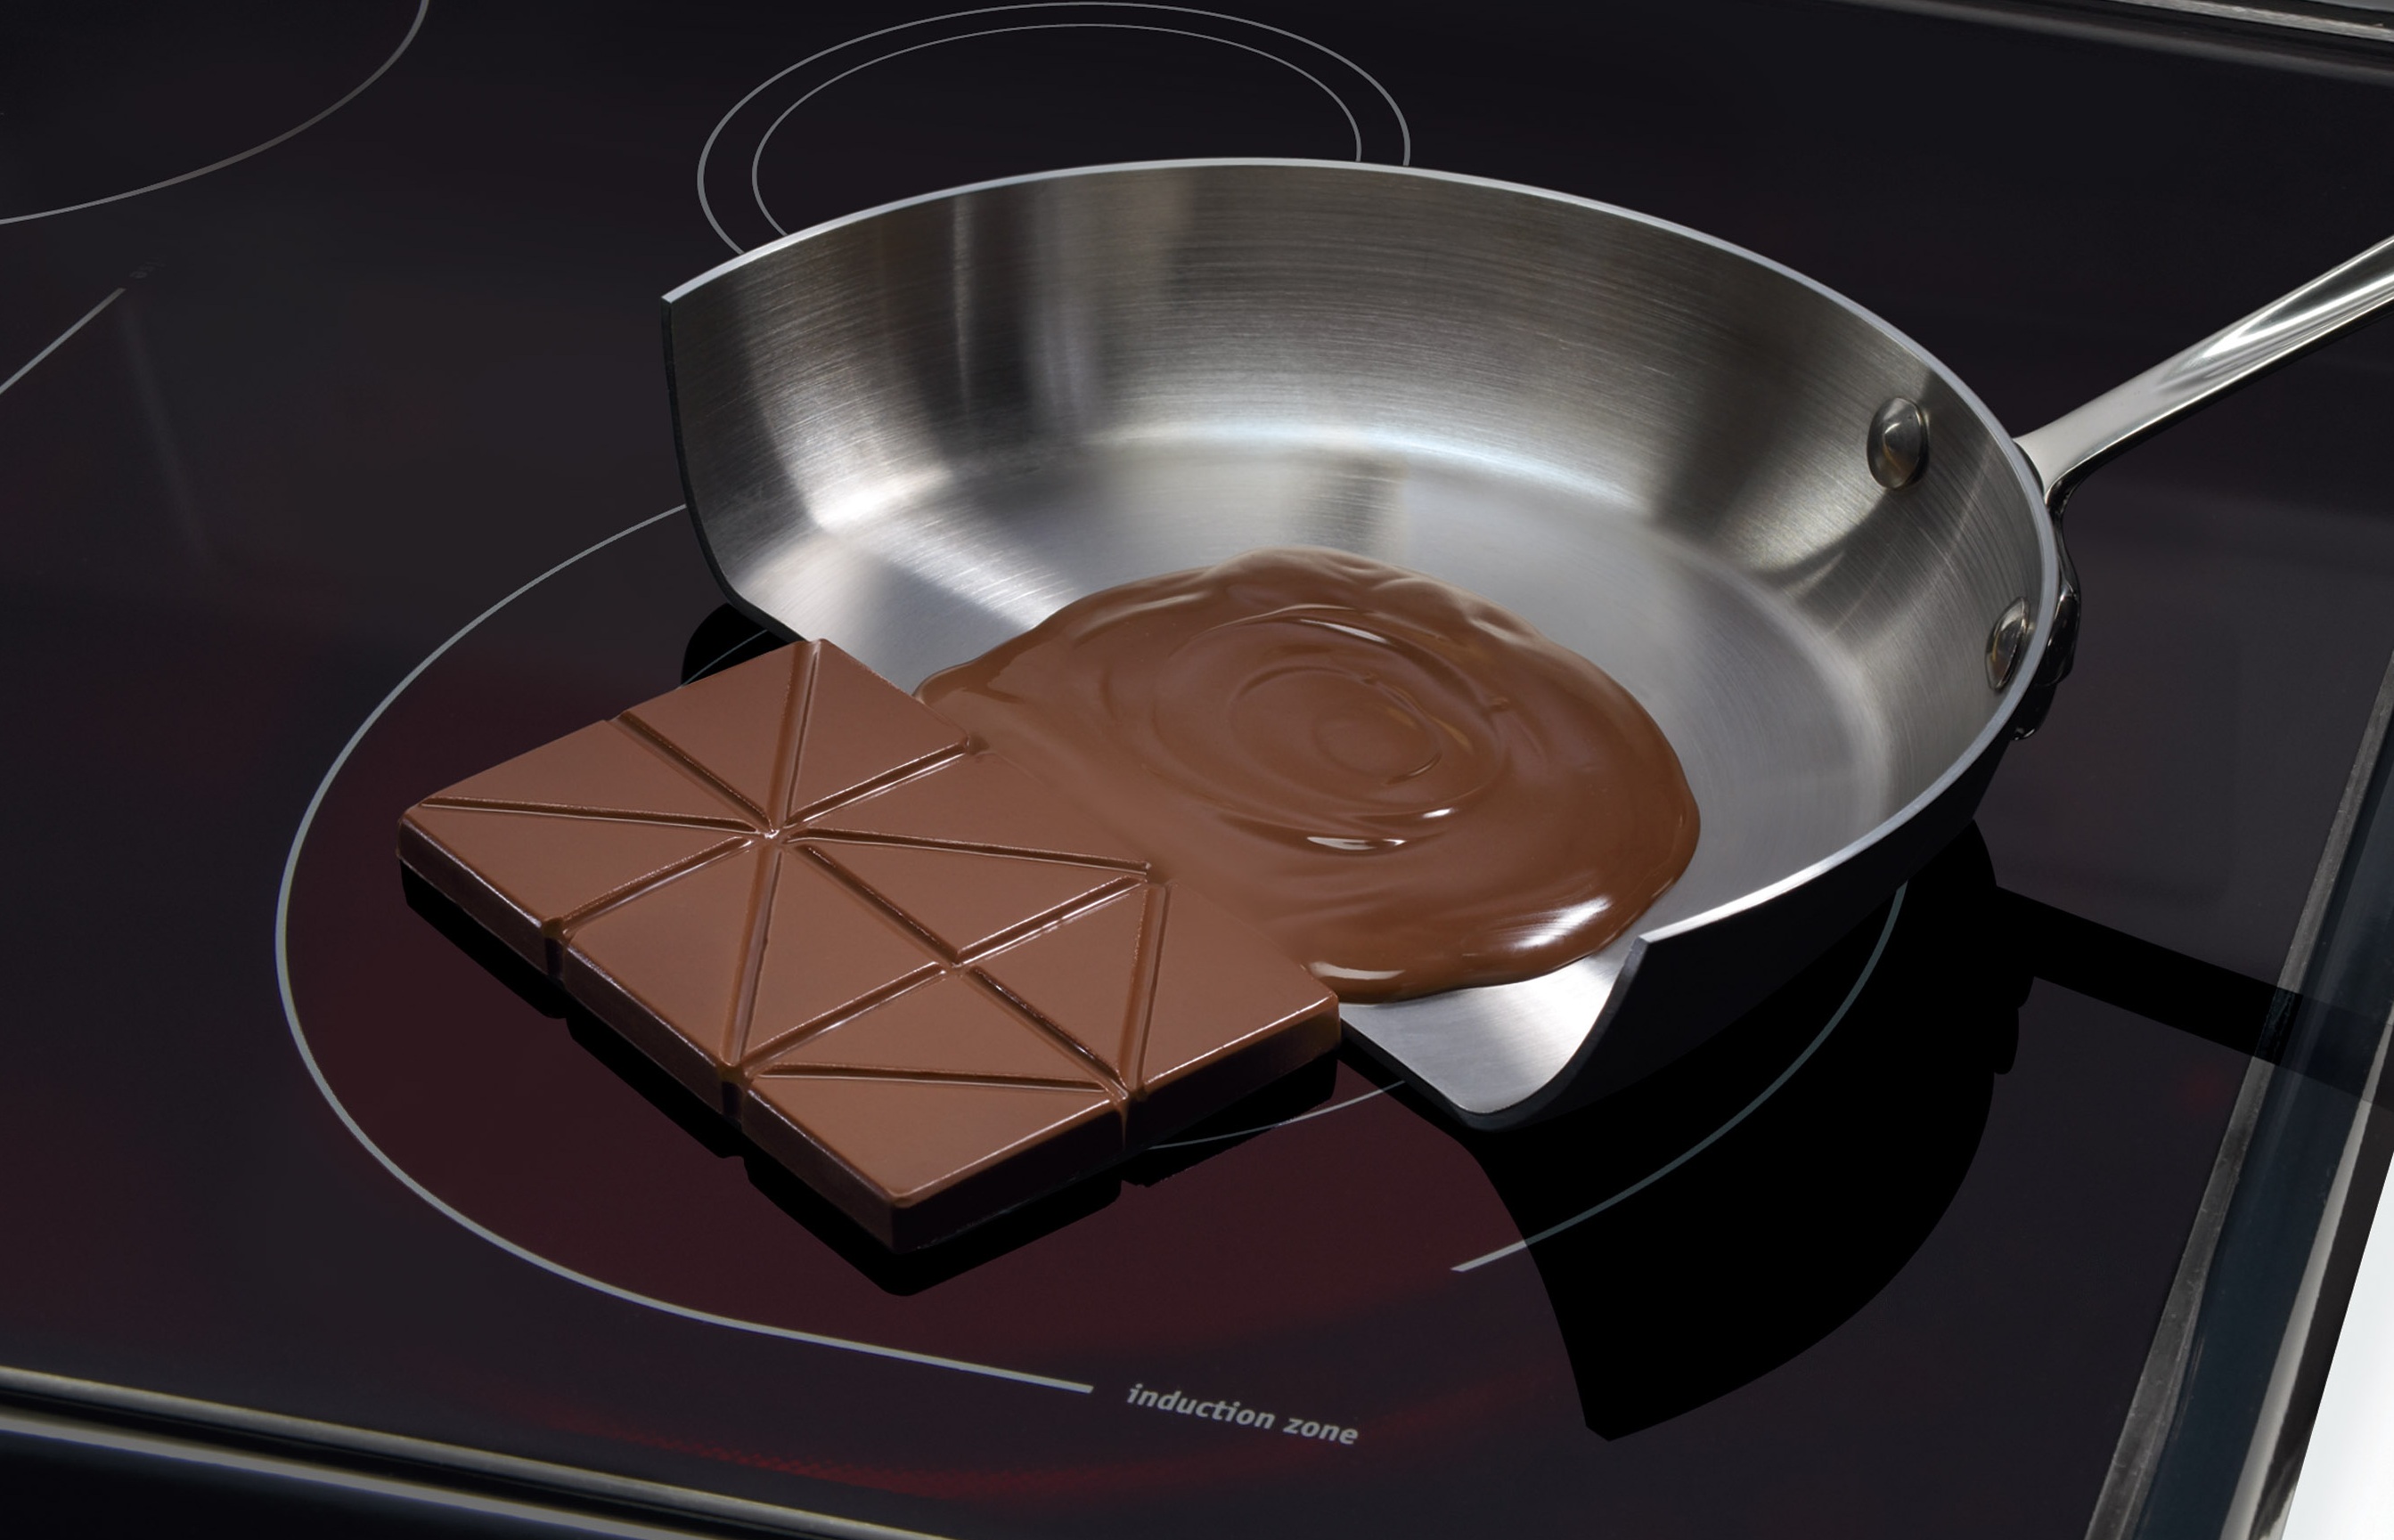 Chocolate-induction-cooking-recipes.jpg